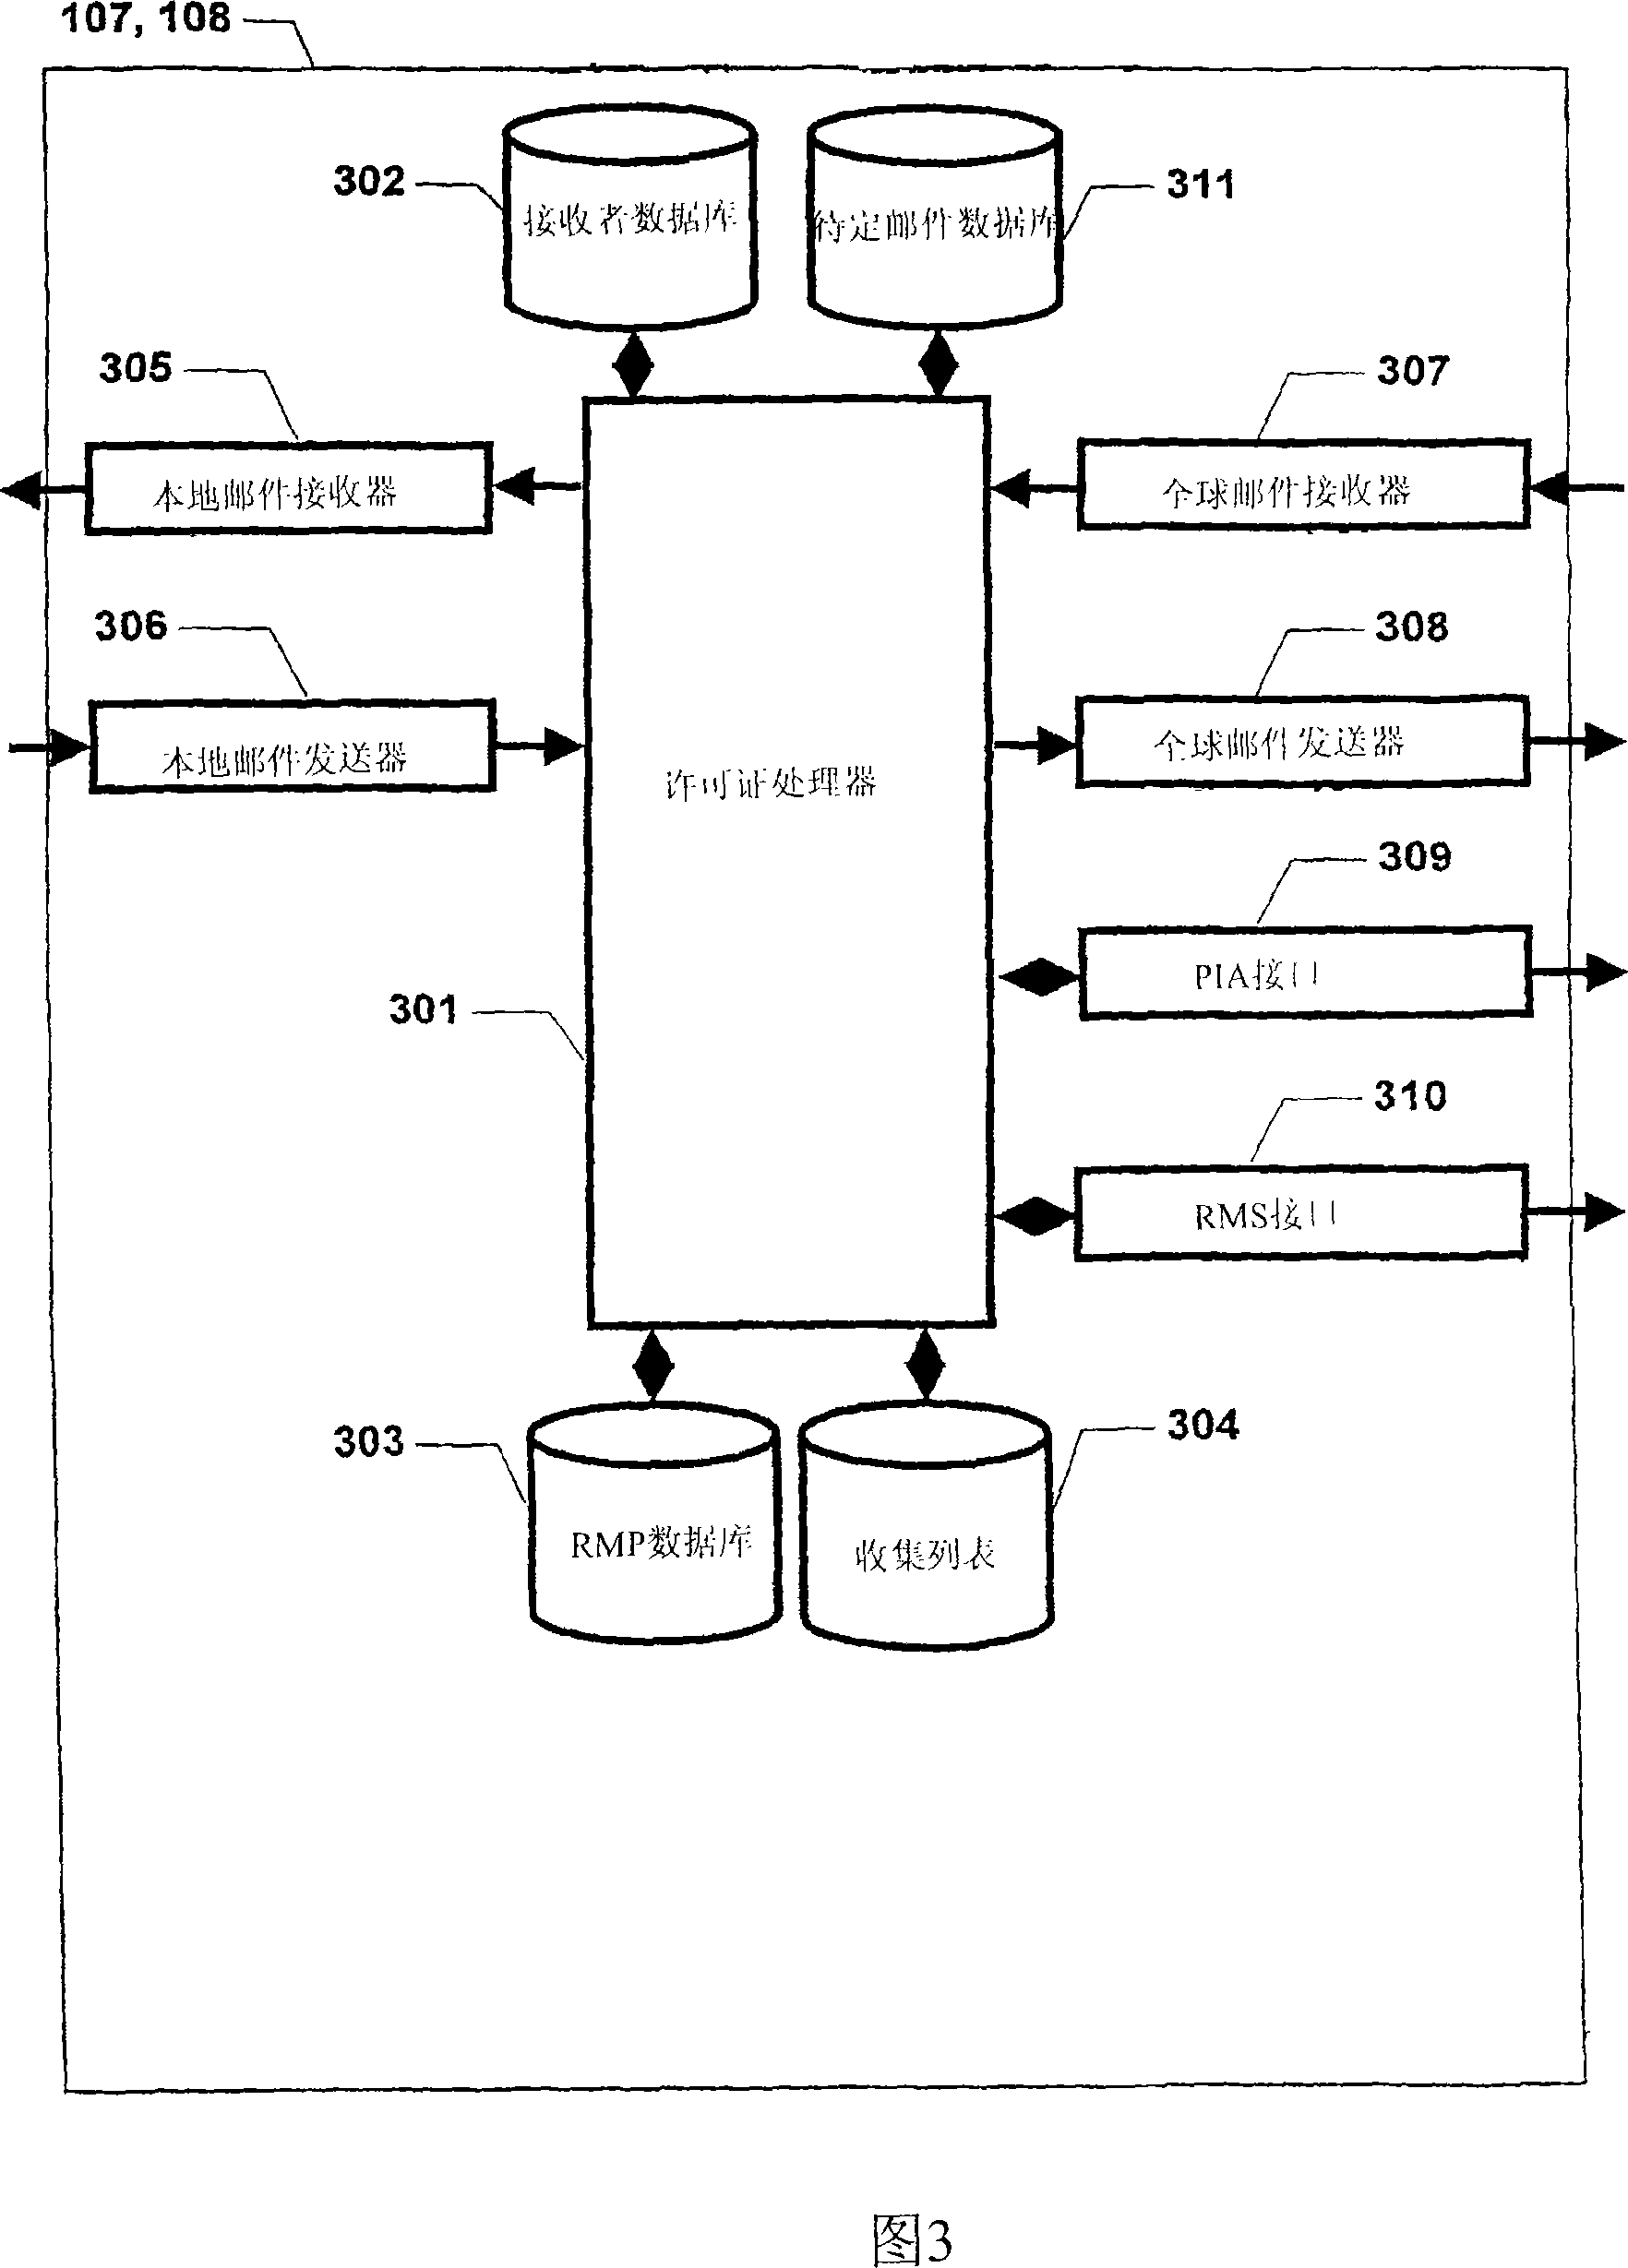 A method and system for regulating electronic mail